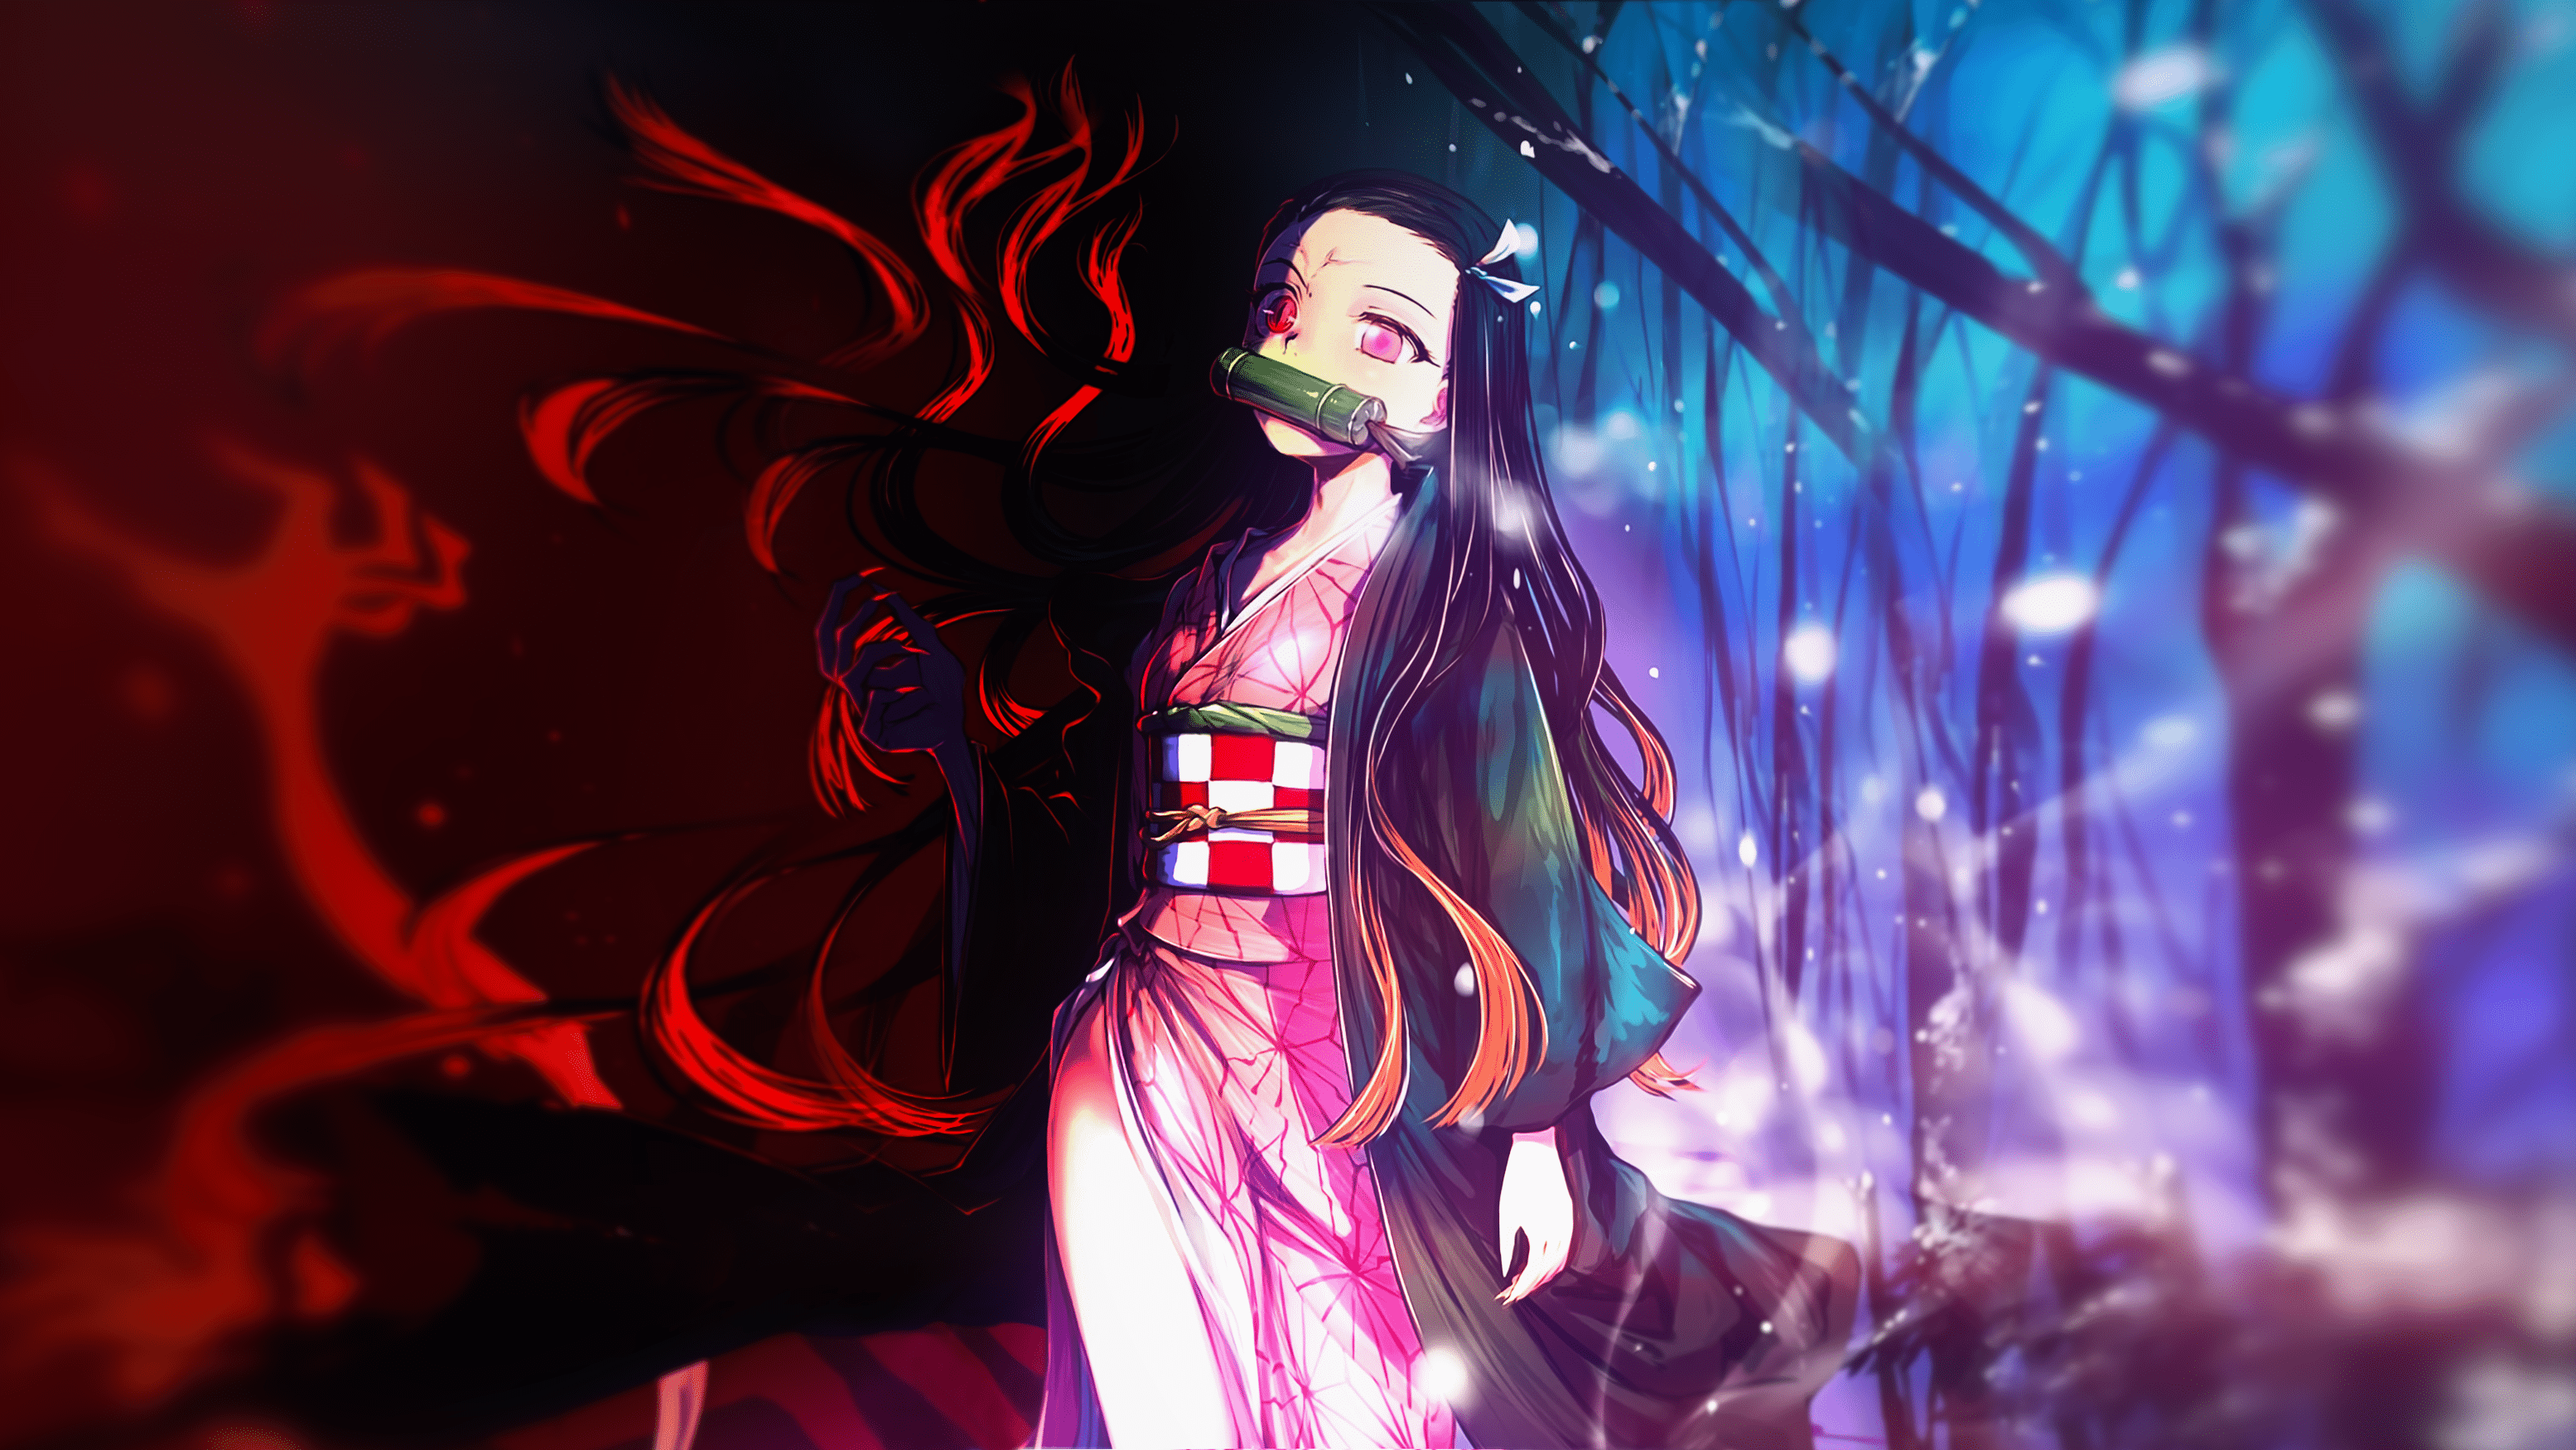 A woman in anime style with red hair - Nezuko